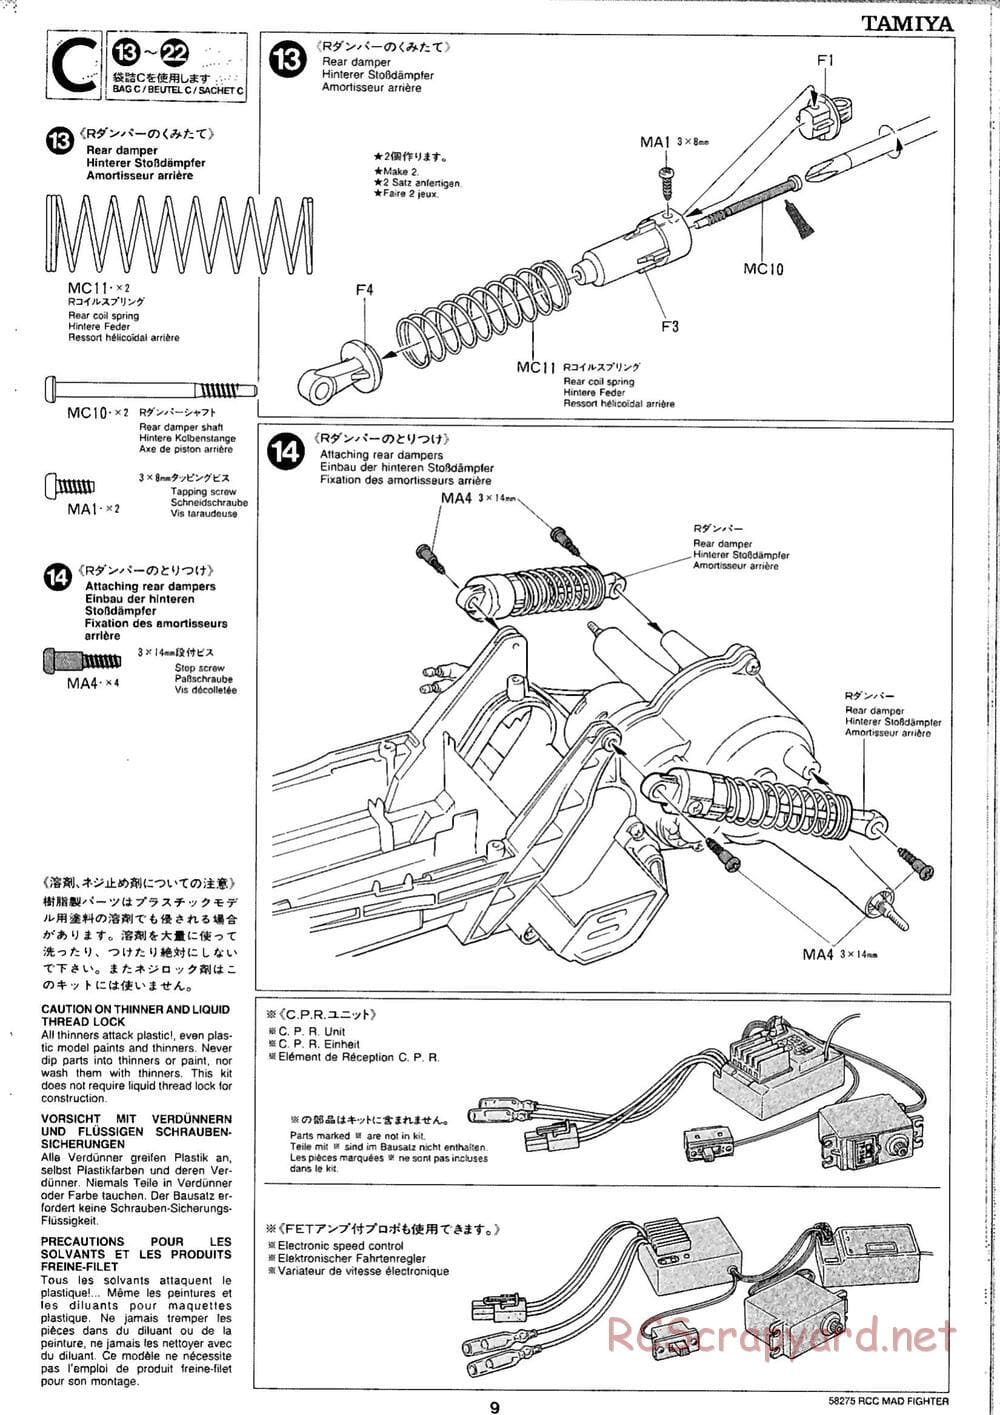 Tamiya - Mad Fighter Chassis - Manual - Page 9